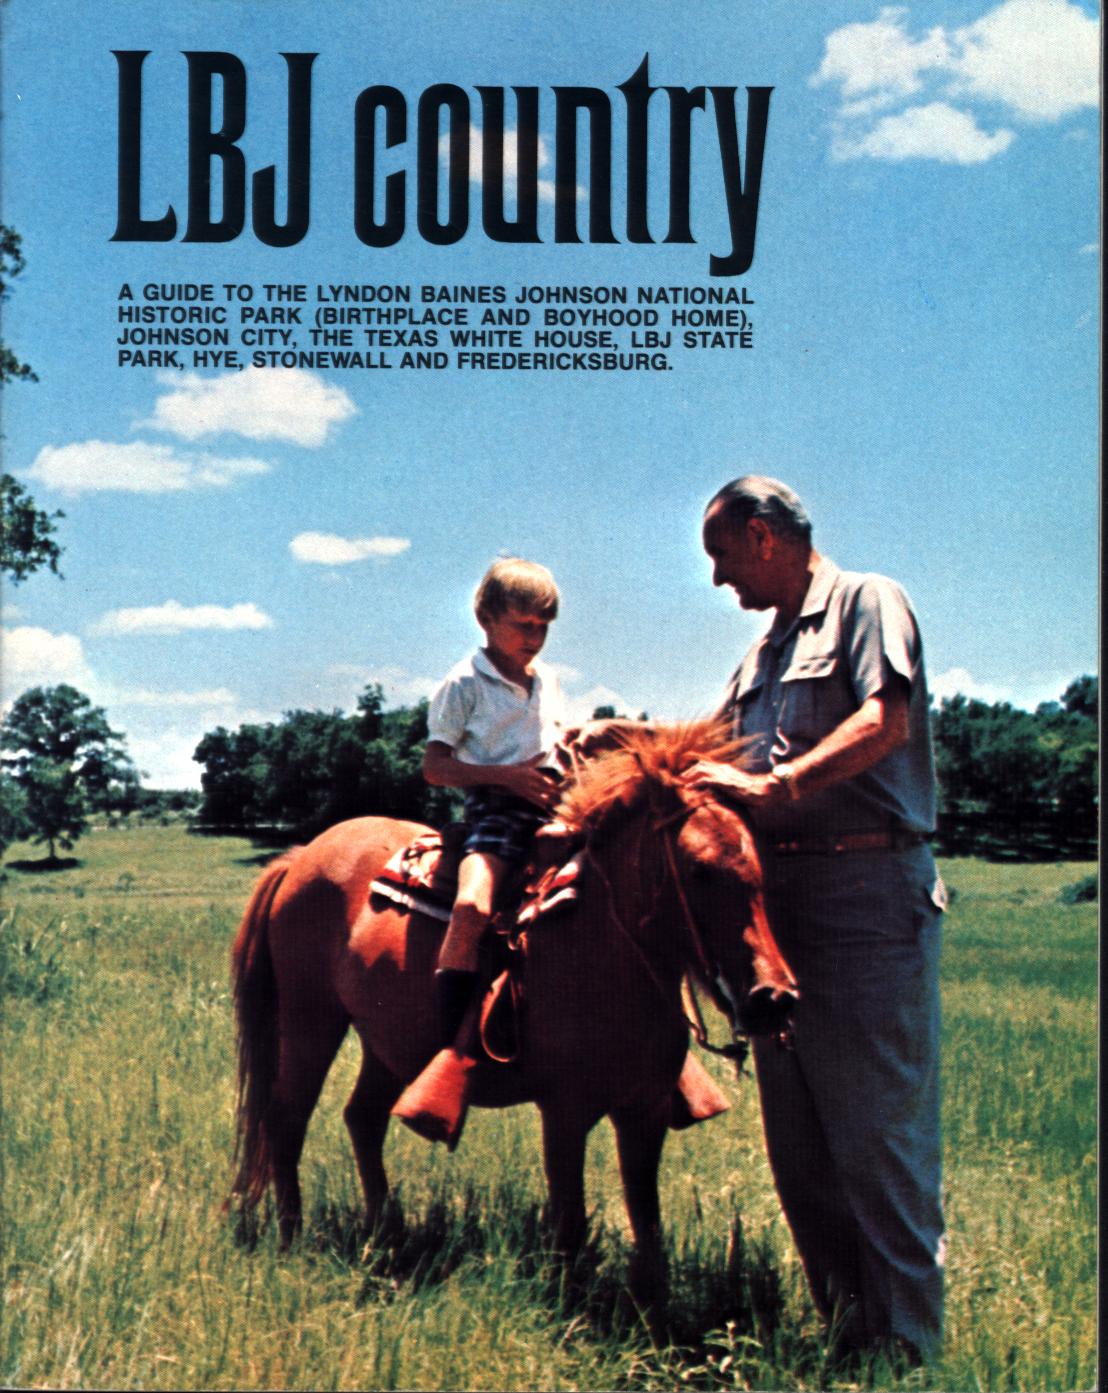 LBJ COUNTRY. 